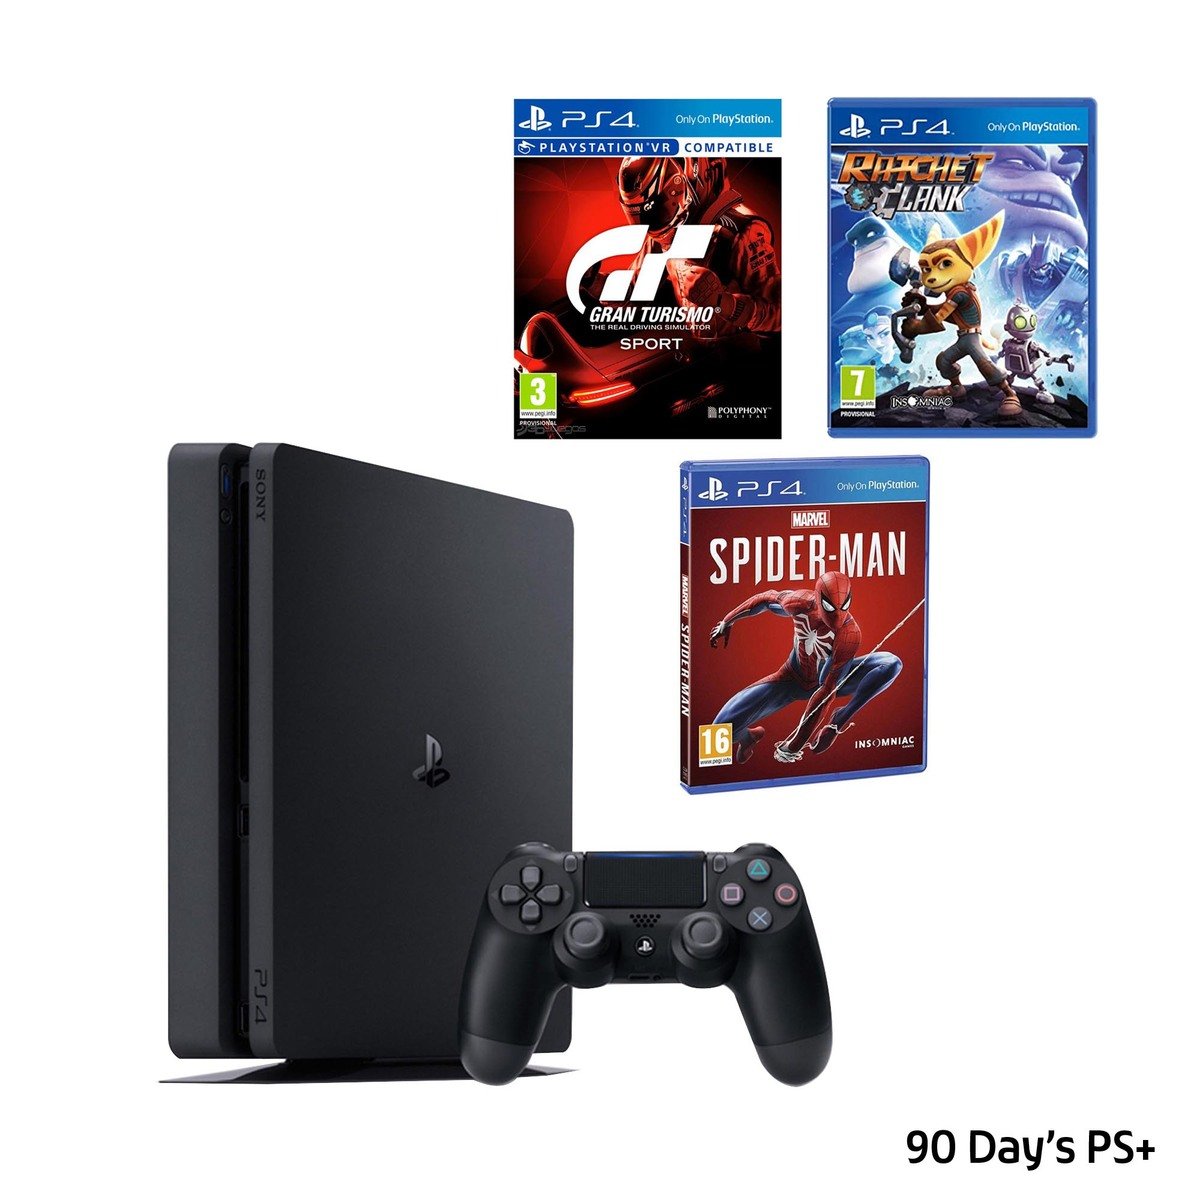 Sony PS4 500GB with Spiderman + GT Sport + Ratchet & Clank + 90 Days PS Plus Subscription